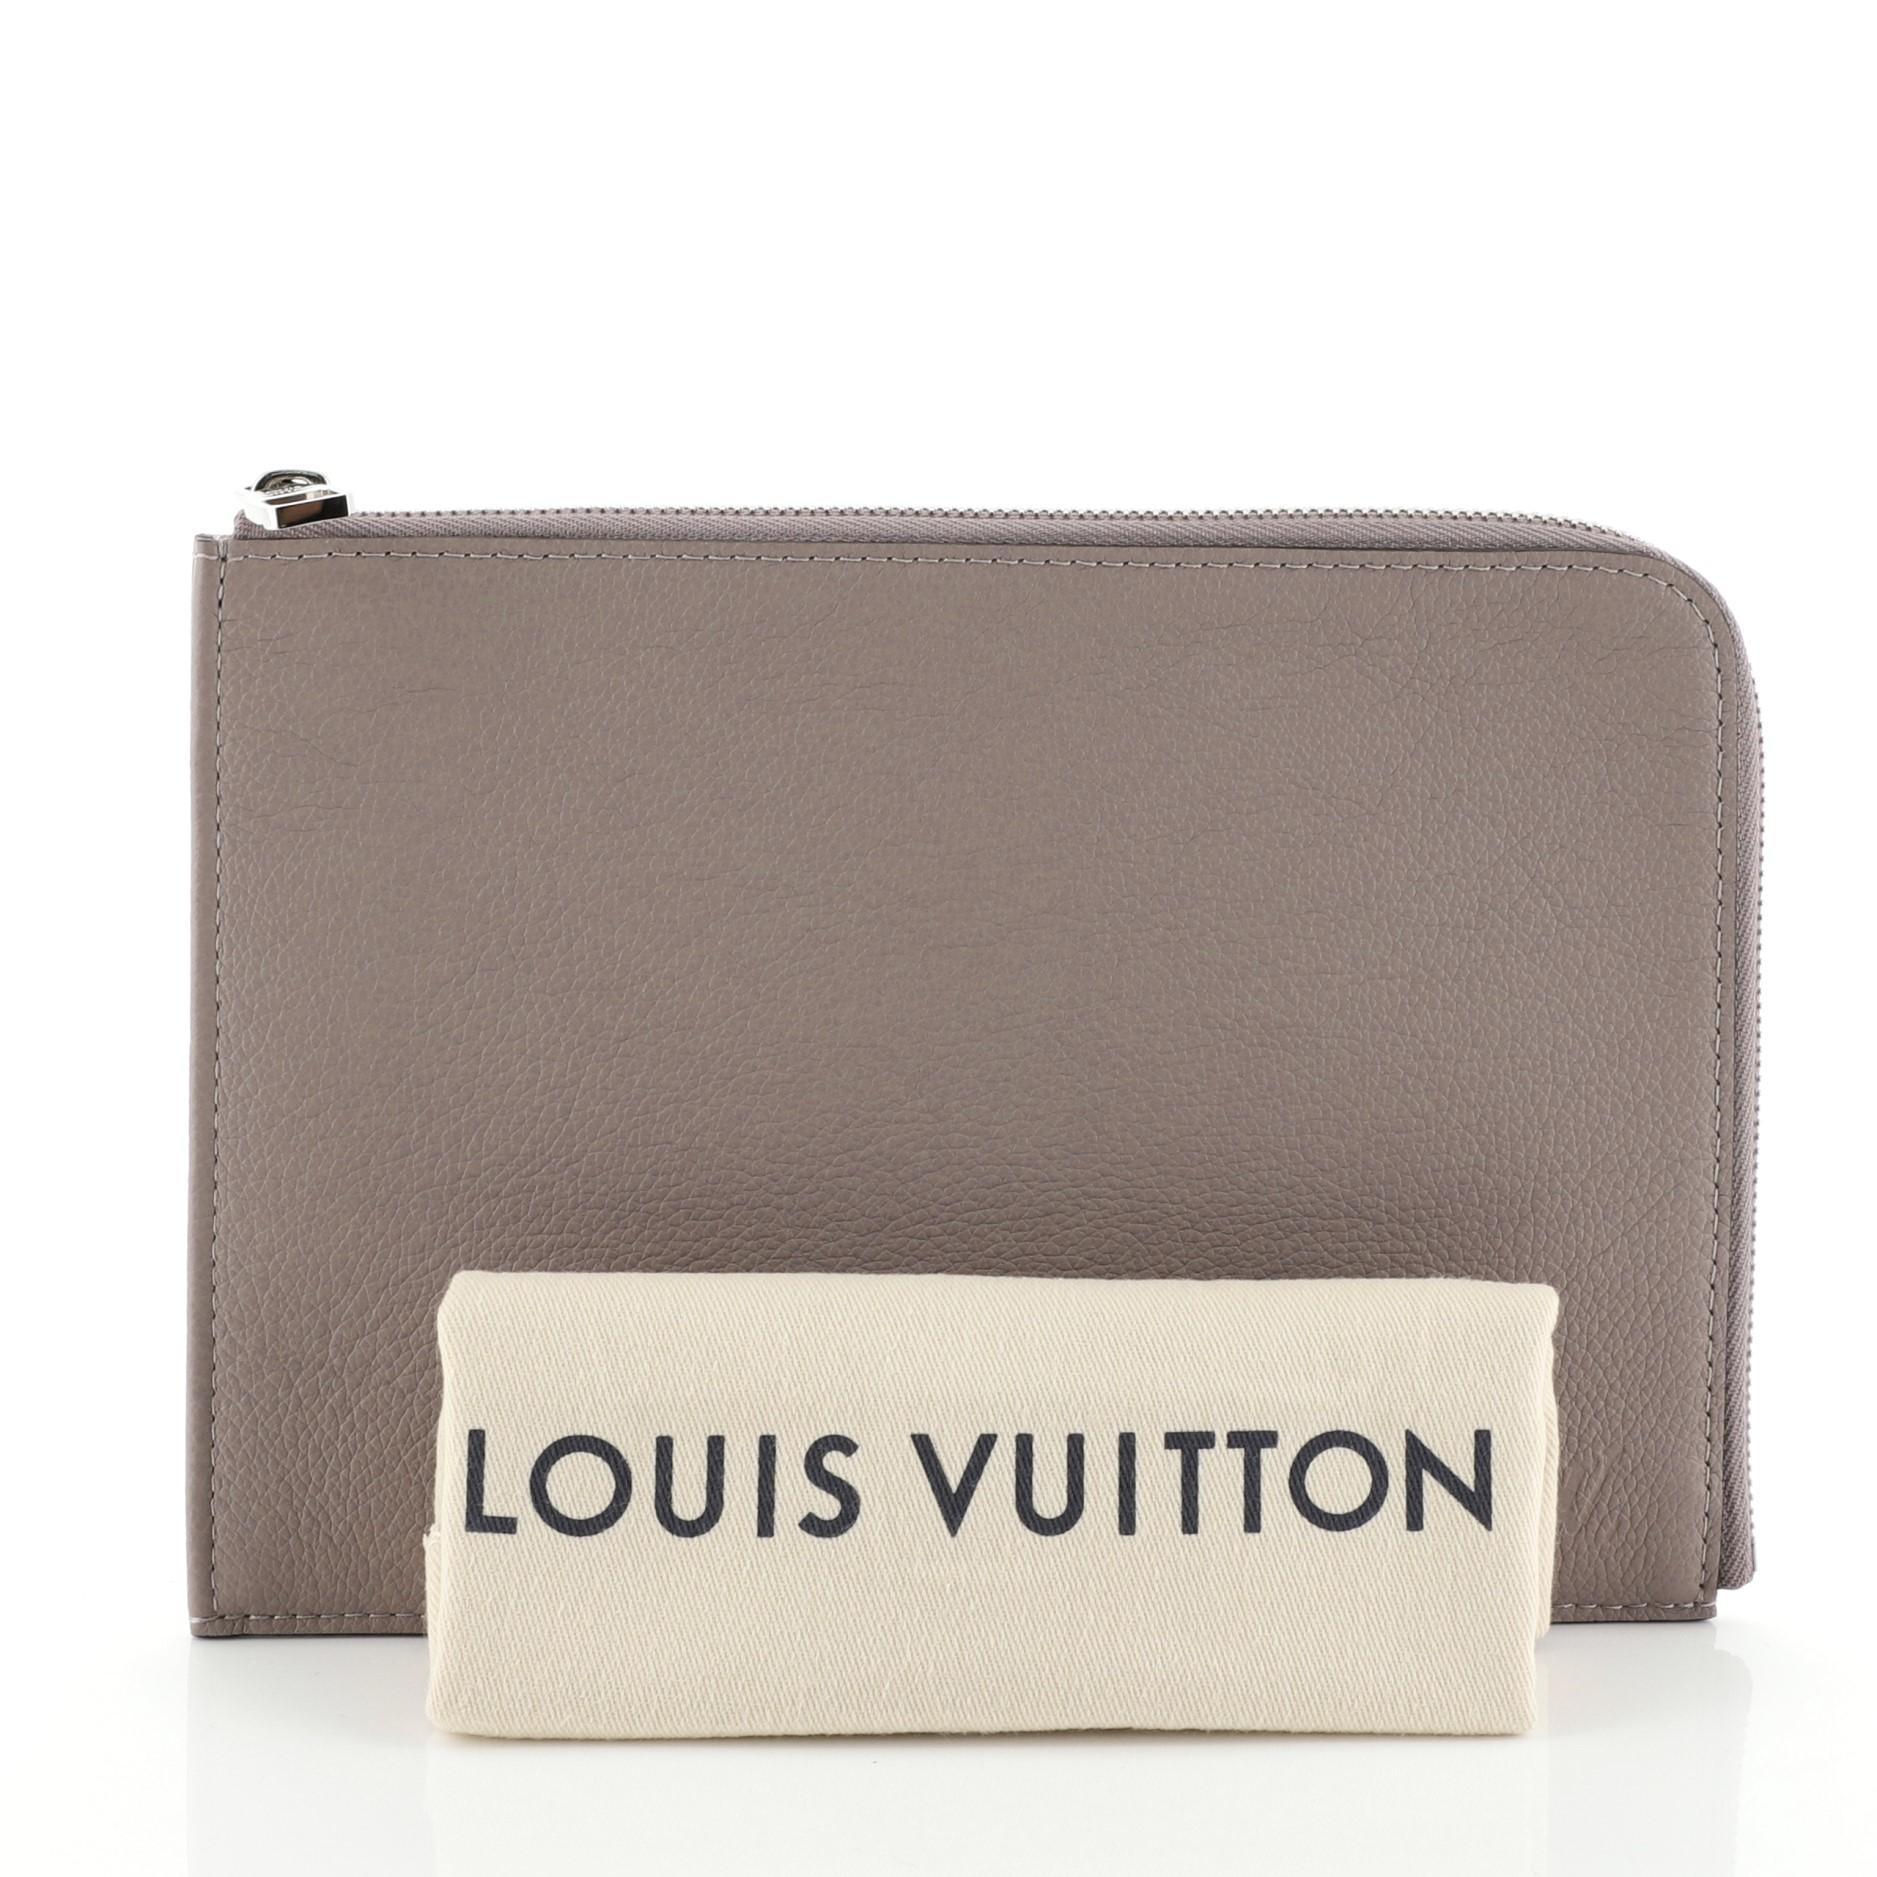 This Louis Vuitton Zip Around Pochette Jour Leather PM, crafted in purple leather, features silver-tone hardware. Its zip closure opens to a neutral microfiber interior with slip pocket. Authenticity code reads: TH4177. 

Estimated Retail Price: